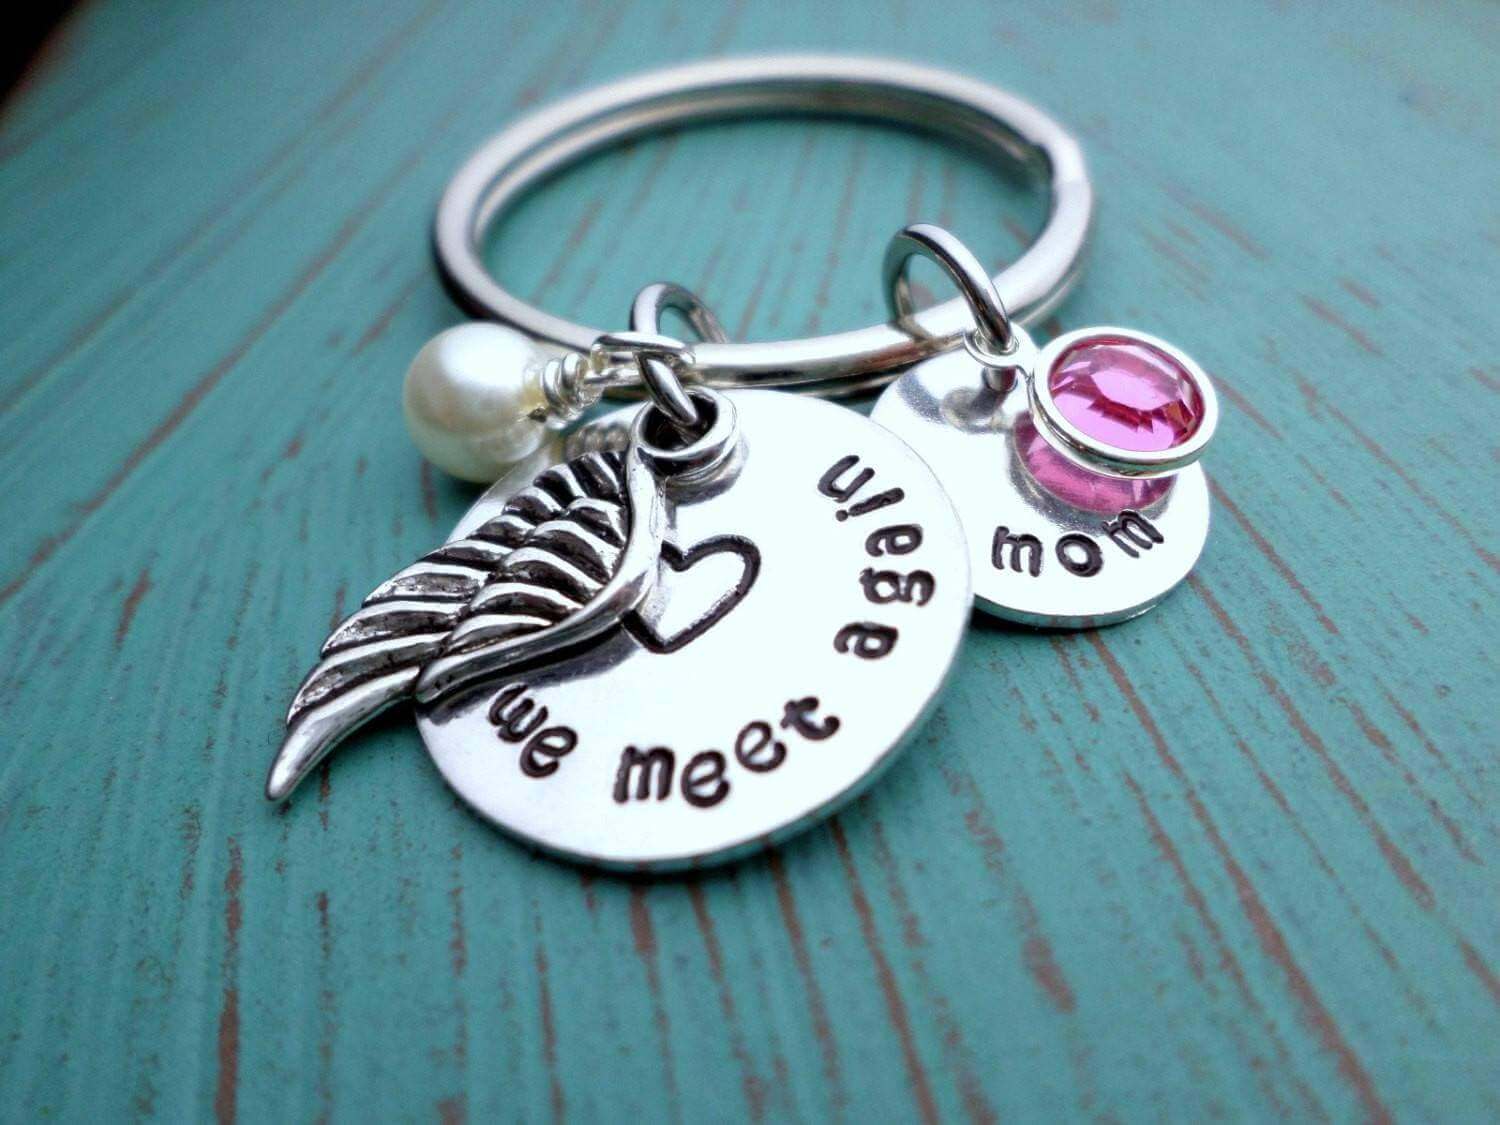 Until We Meet Again Memorial Keychain, Carry You With Me, Remembrance Jewelry, Hold You In My Heart, Hold You In Heaven, Keychains, HandmadeLoveStories, HandmadeLoveStories , [Handmade_Love_Stories], [Hand_Stamped_Jewelry], [Etsy_Stamped_Jewelry], [Etsy_Jewelry]